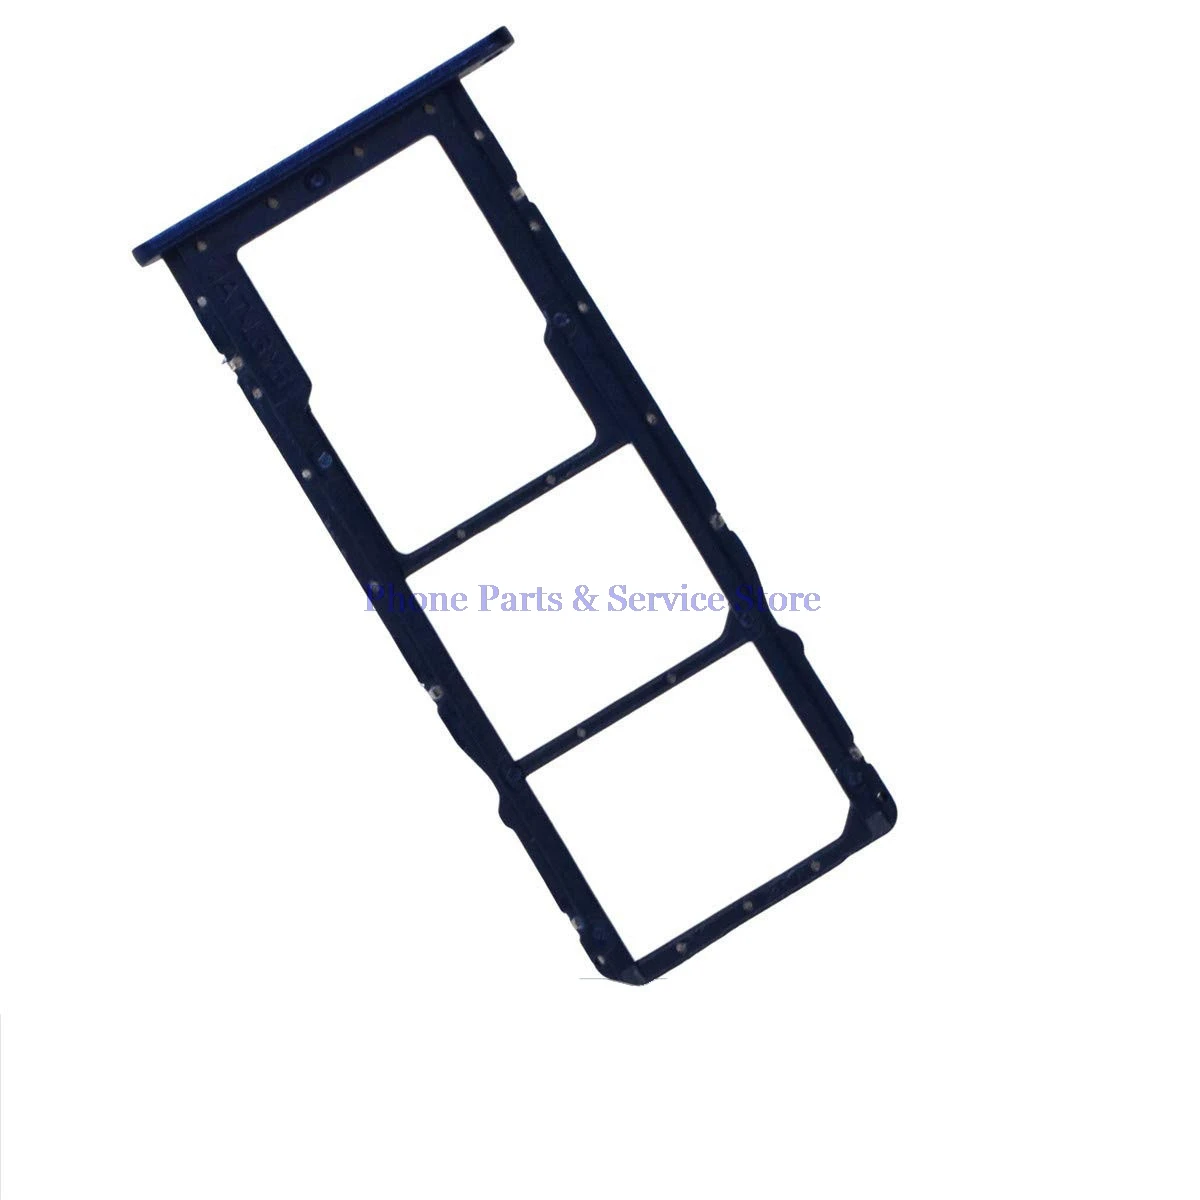 Revolutionair vochtigheid computer For Huawei Y6 2019 Y6 Prime 2019 SIM Card Tray Slot Holder Y6 Pro 2019 SD  Memory Card Tray Replacement Part|Mobile Phone Housings & Frames| -  AliExpress